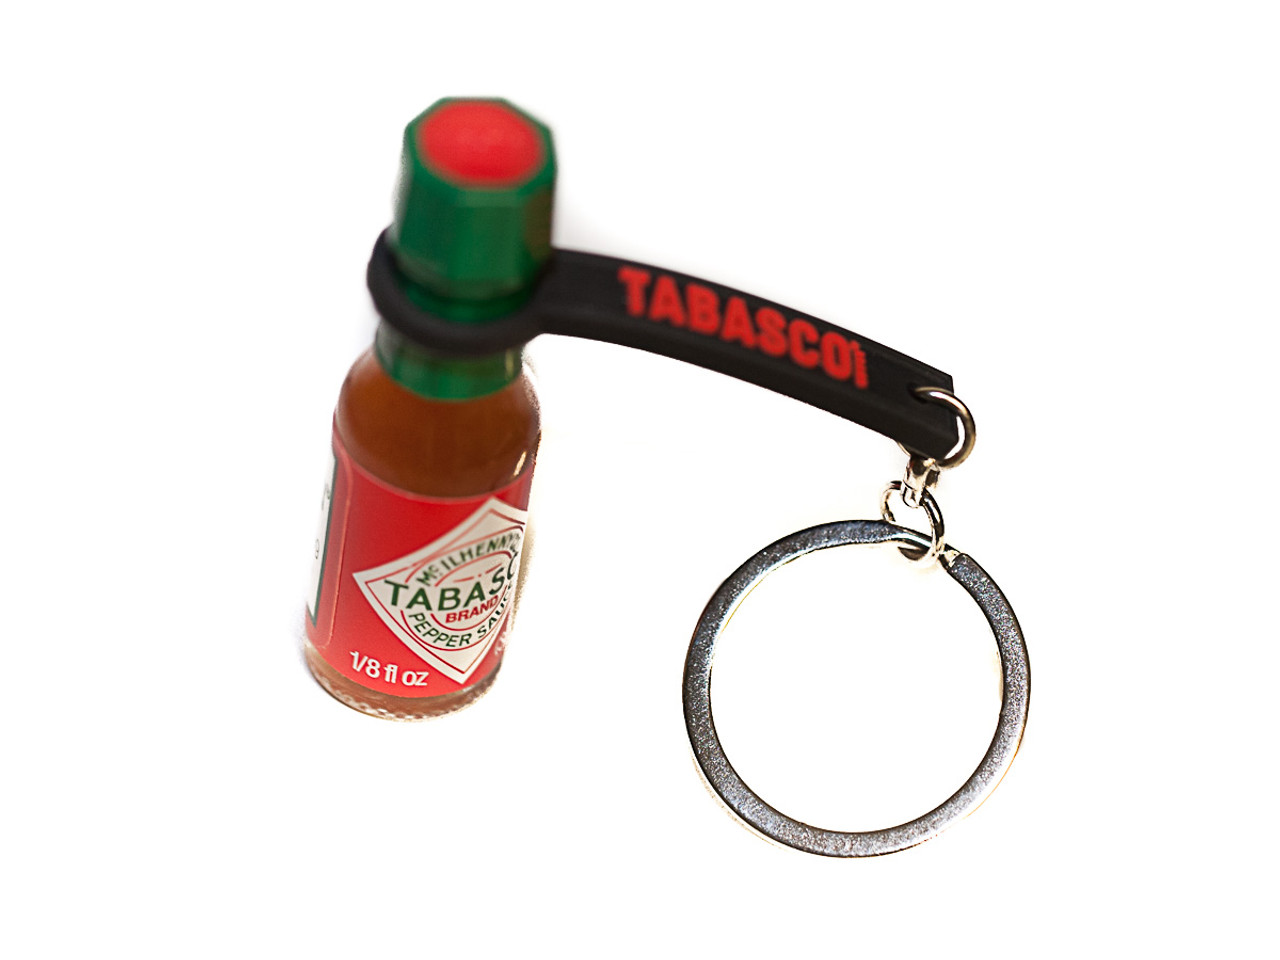 Porter Trail GENUINE LEATHER HOT SAUCE KEYCHAIN Includes a .75 oz Cholula  Hot Sauce Bottle - Portable Hot Sauce for On the Go or Travel - Mini Hot